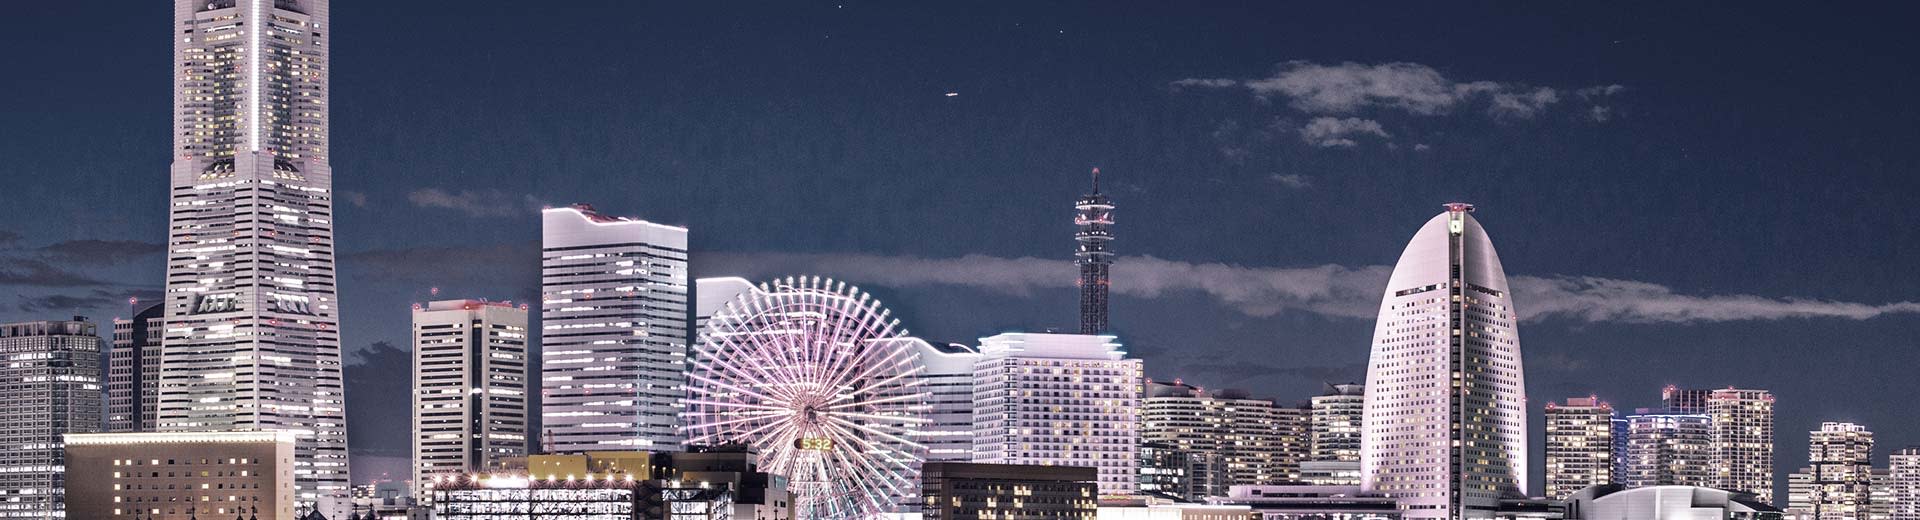 A row of modern skyscrapers at night in Yokohama light up the dark, with an irreverent Ferris Wheel in the foreground.